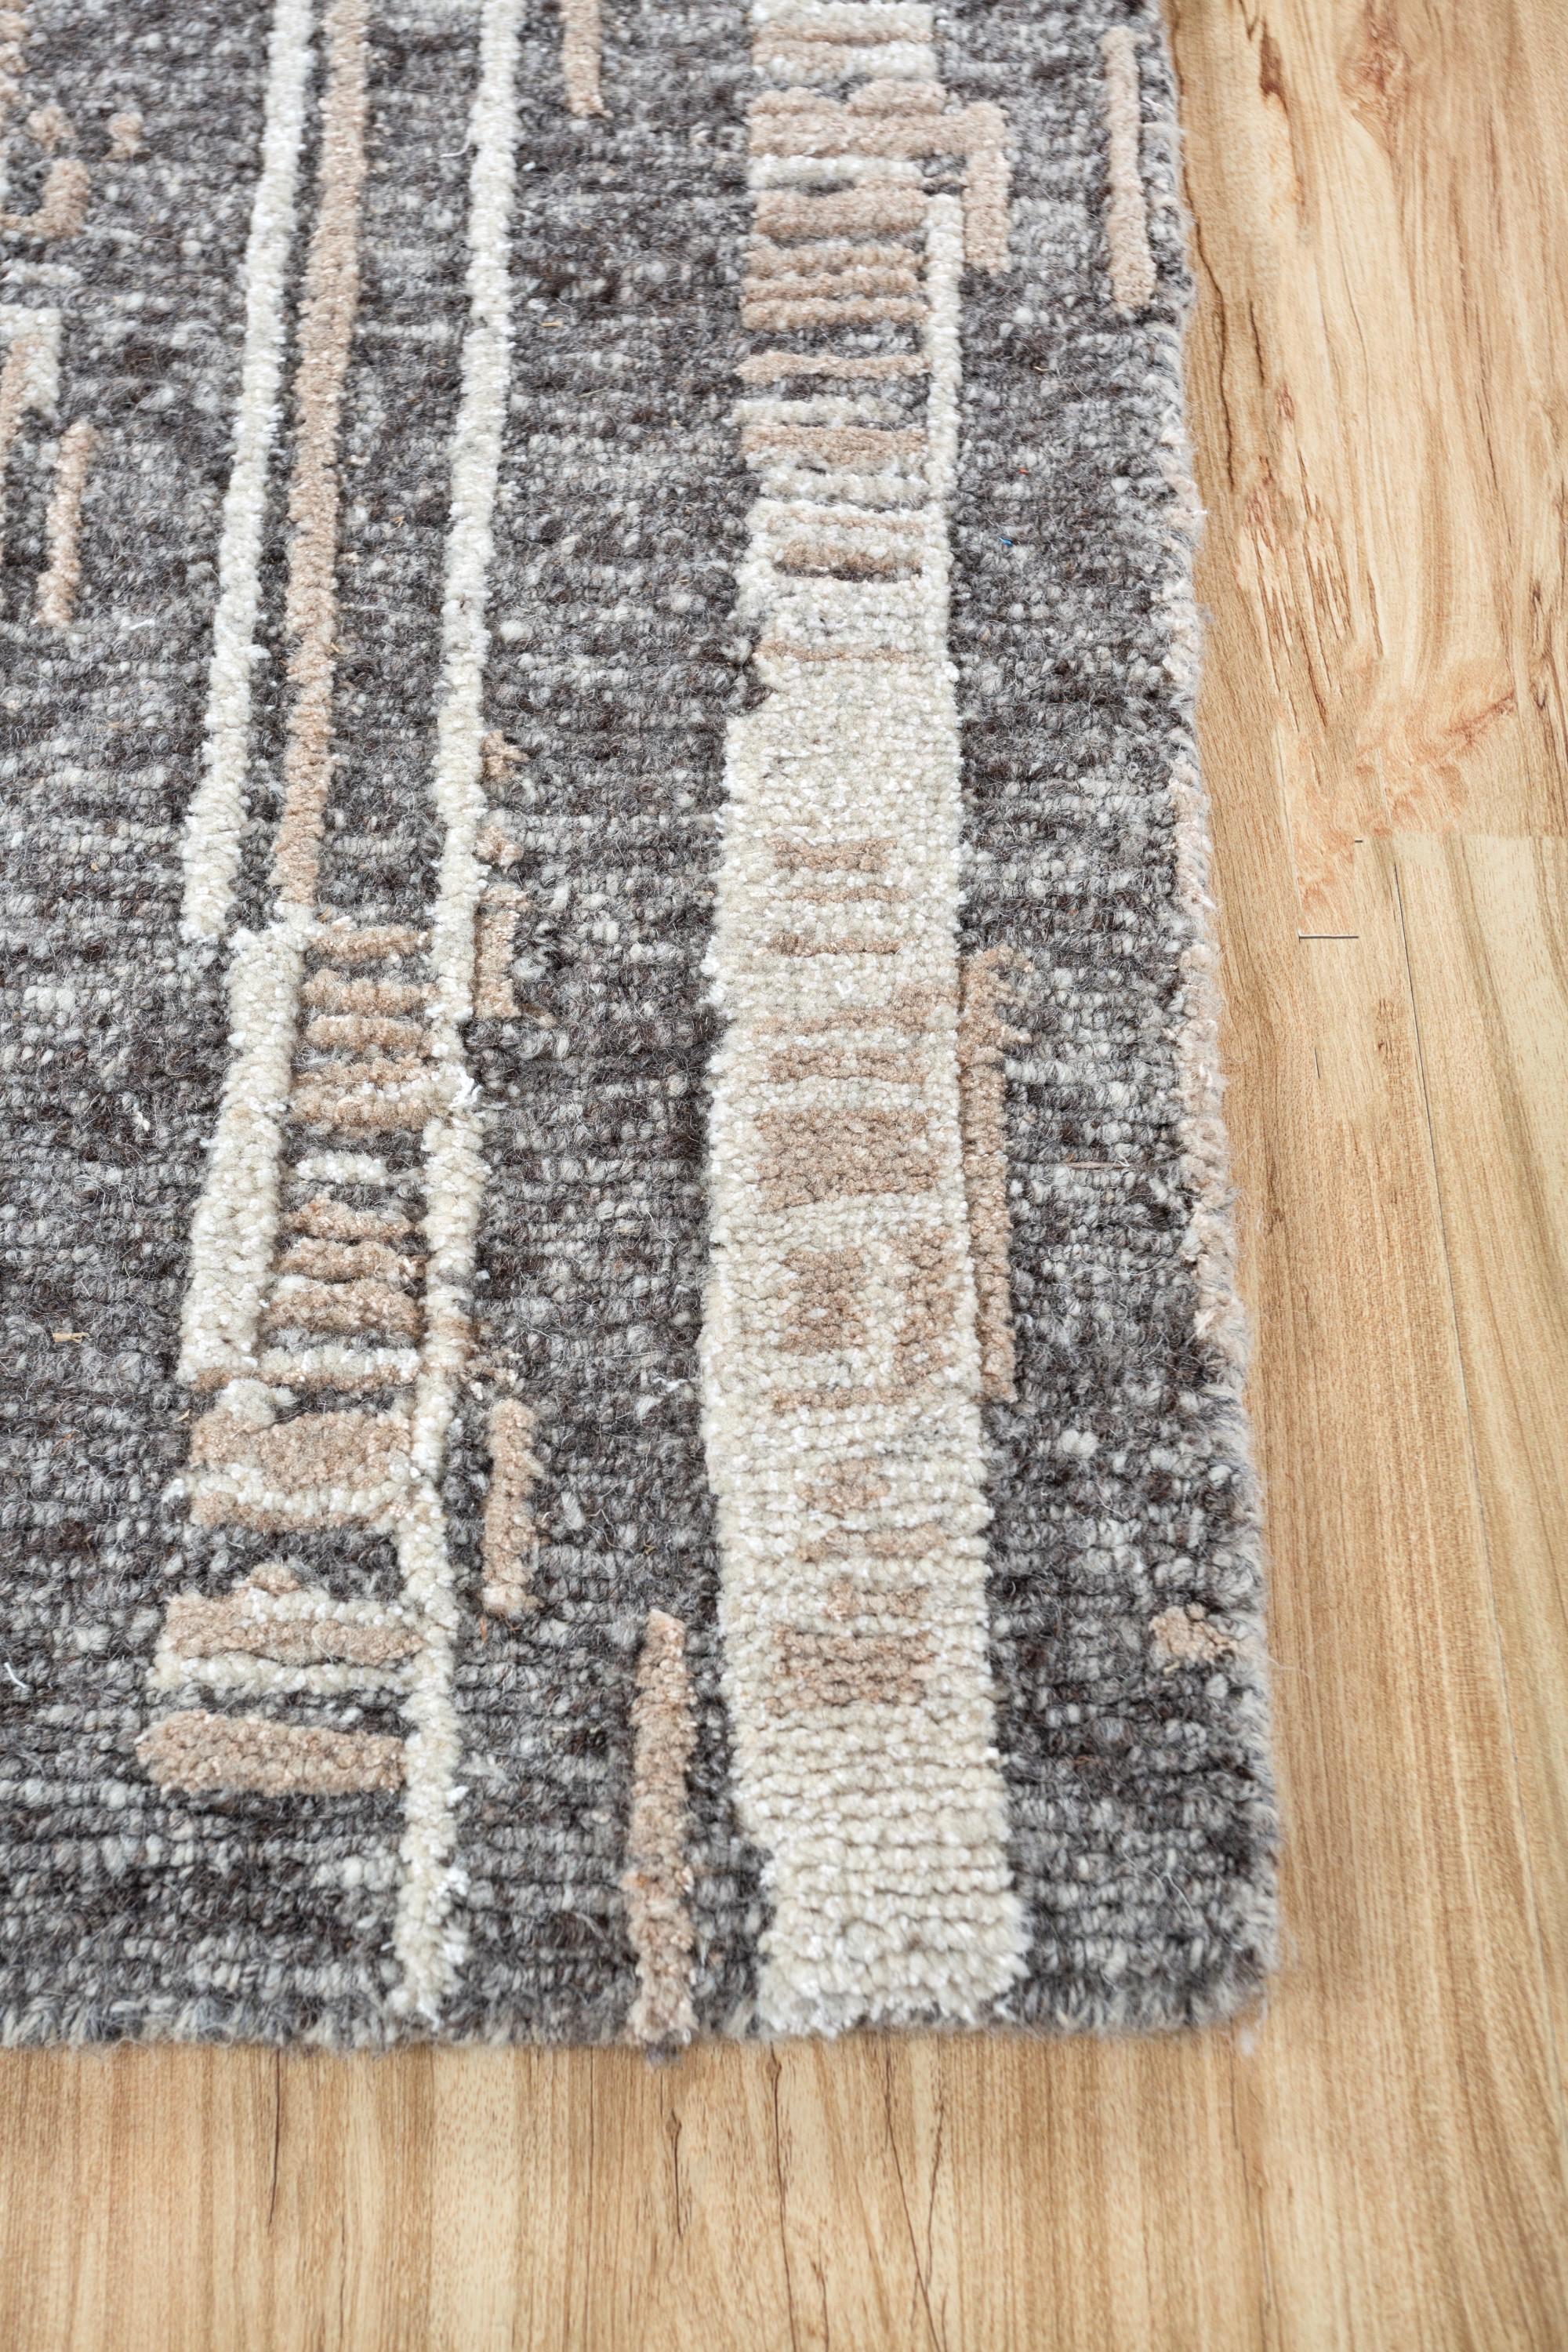 Imagine stepping into a realm of timeless elegance with our hand-knotted rug. This masterpiece  seamlessly weaves Moroccan charm into a modern aesthetic, creating an eclectic dance of patterns. Crafted with an all-wool construction, the modern rug